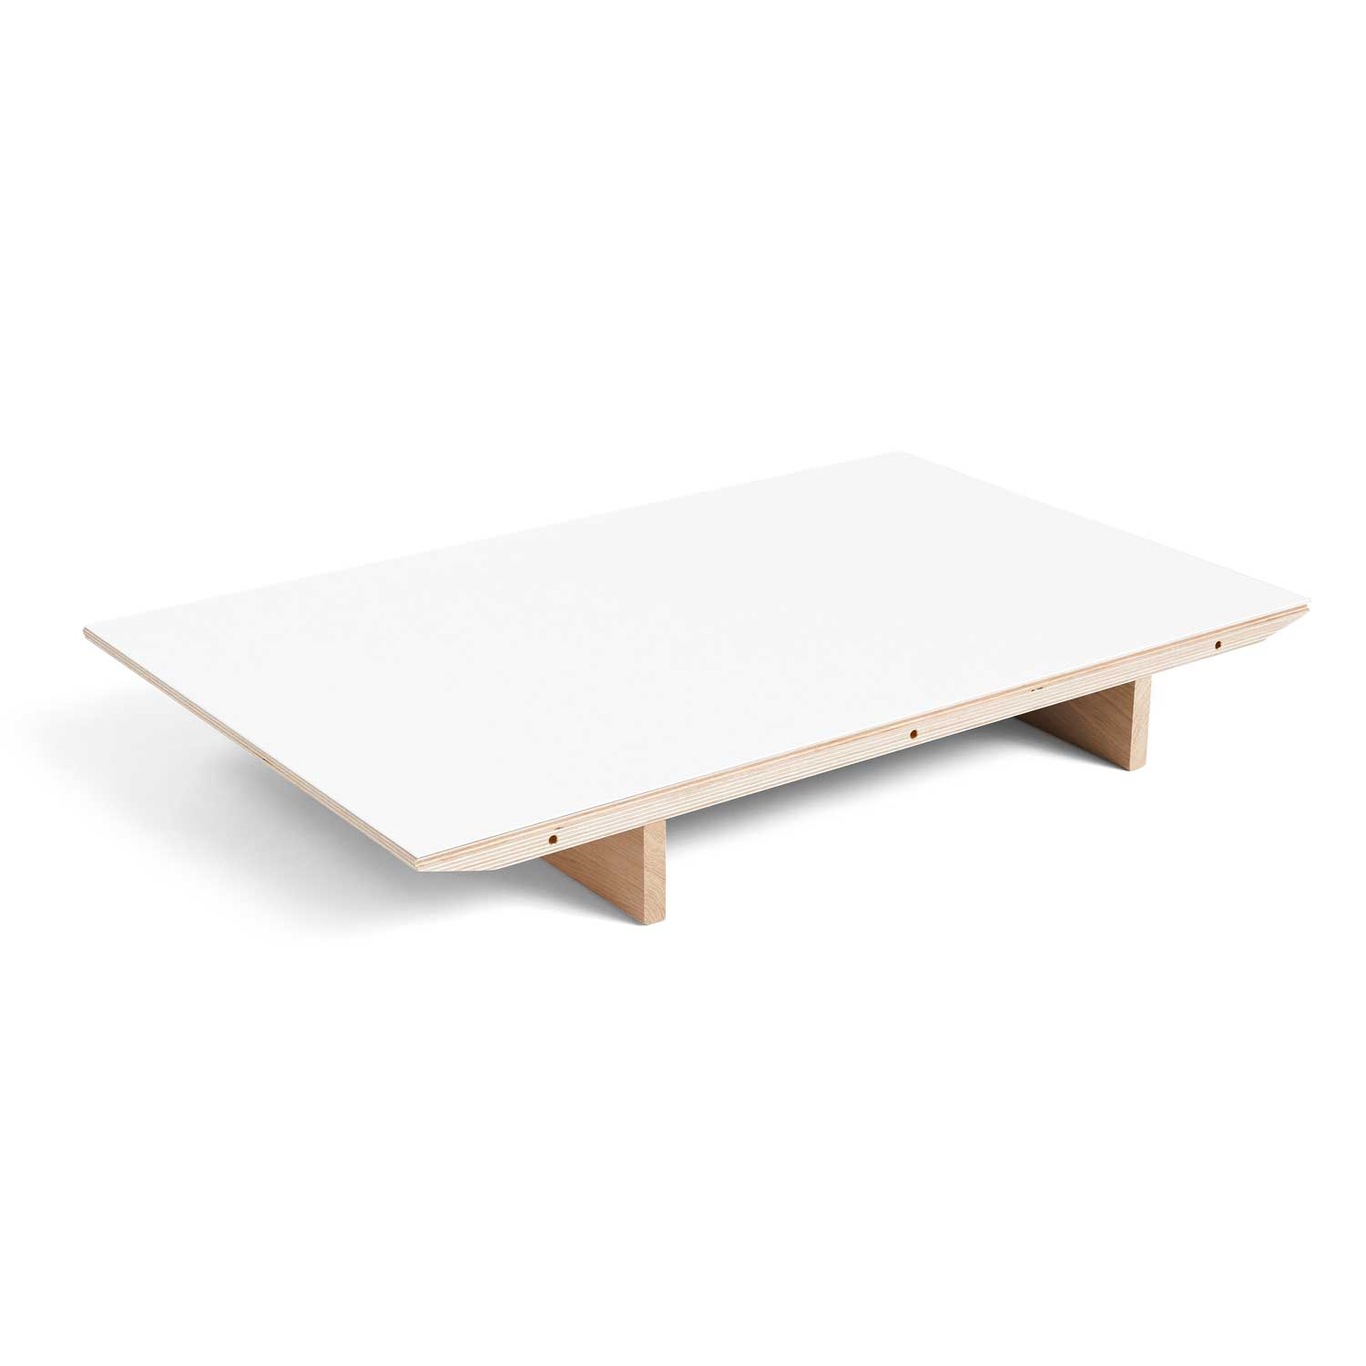 CPH 30 Extendable Leaf 50x90 cm, White Laminate/Water-based Lacquered Oak